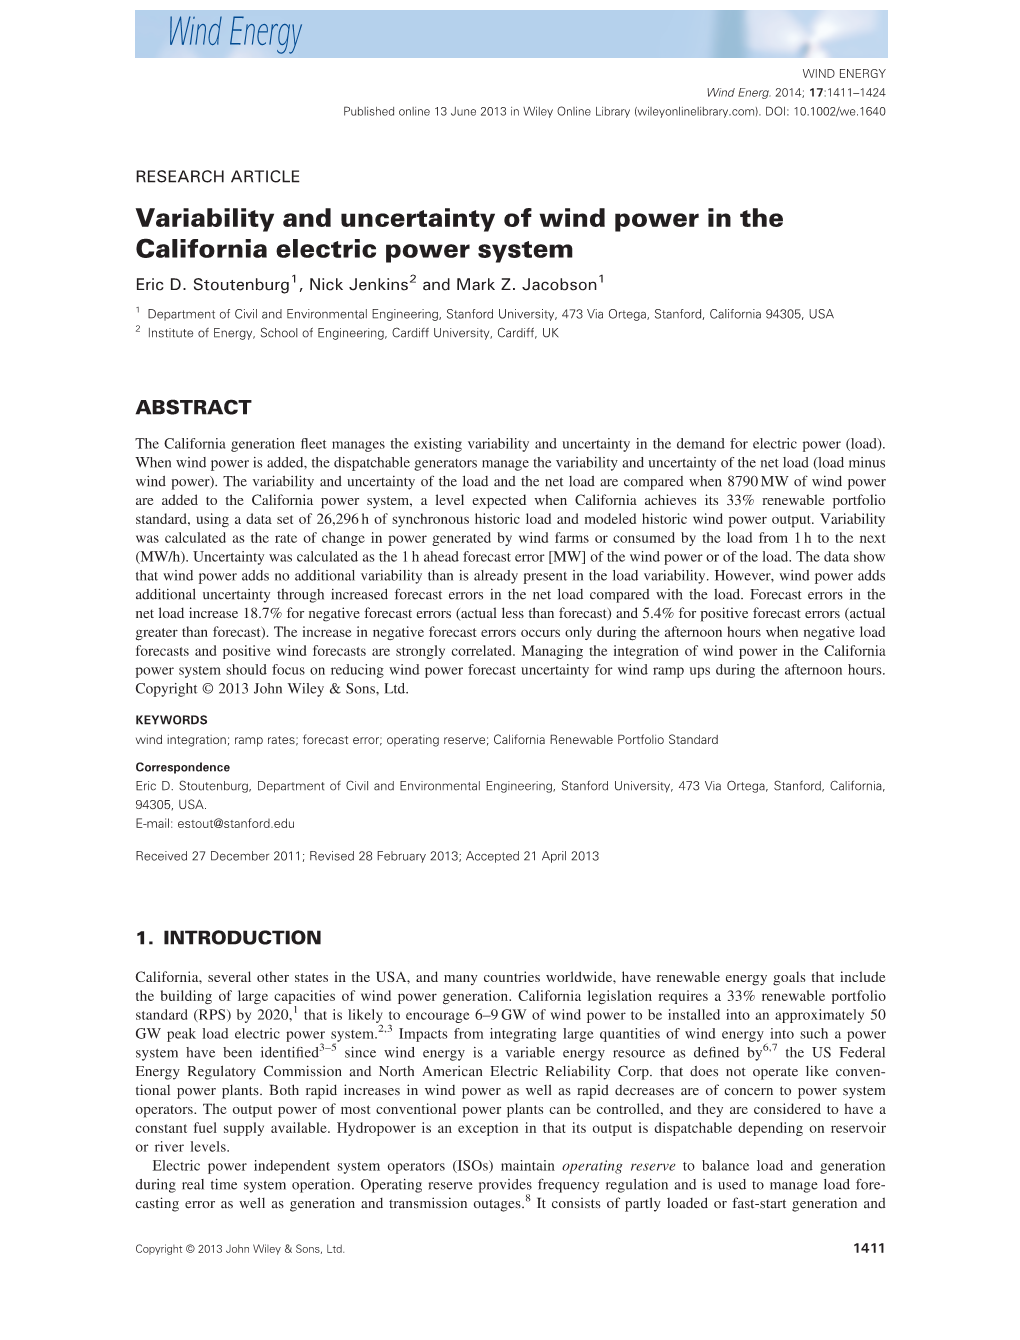 Variability and Uncertainty of Wind Power in the California Electric Power System